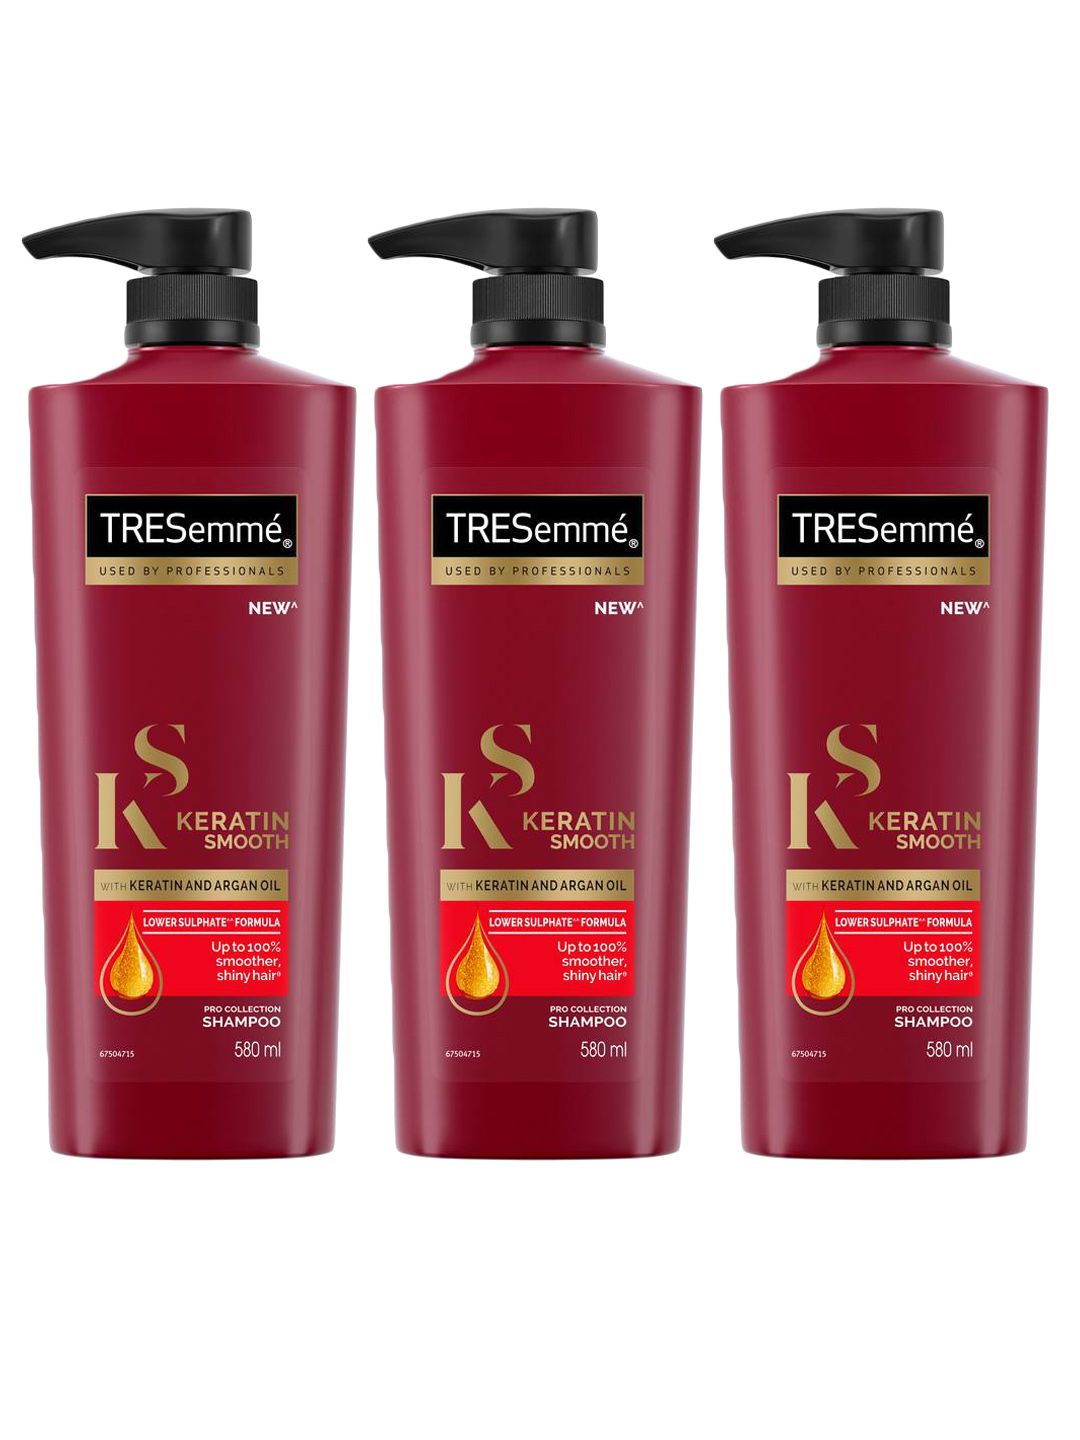 TRESemme Set of 3 Keratin Smooth Shampoos with Argan Oil - 580 ml each Price in India